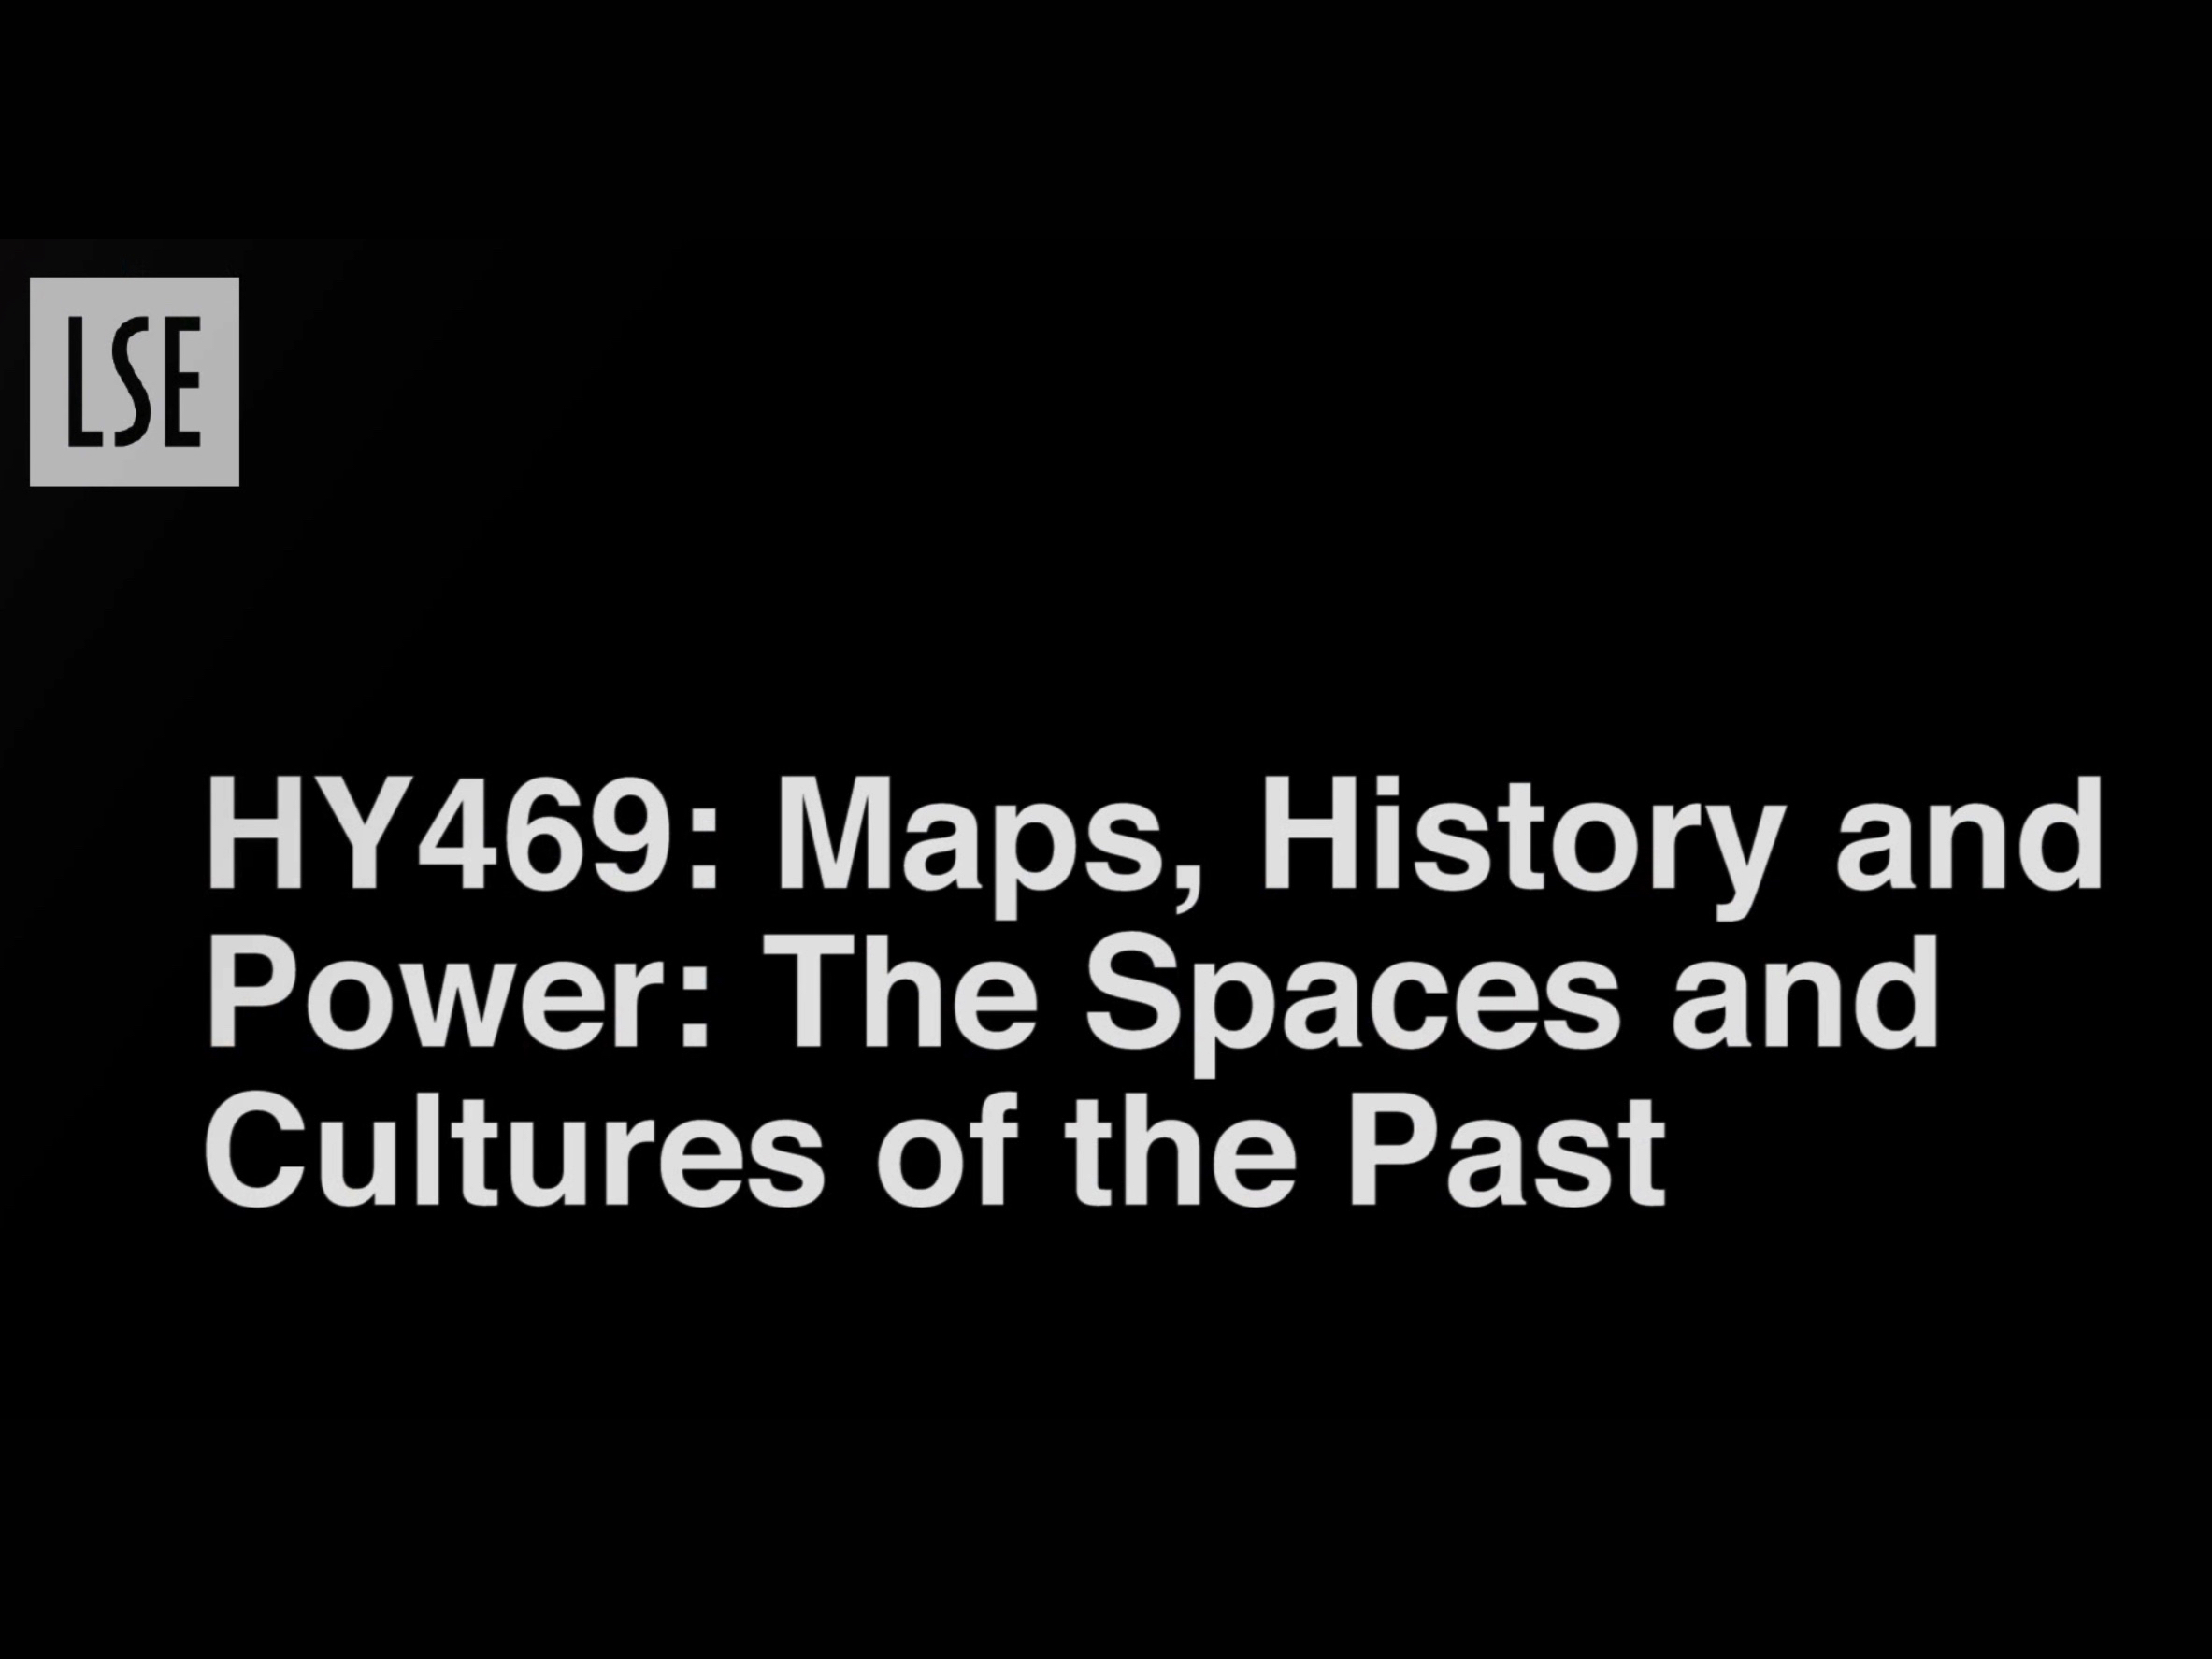 HY469: Maps, History and Power: The Spaces and Cultures of the Past